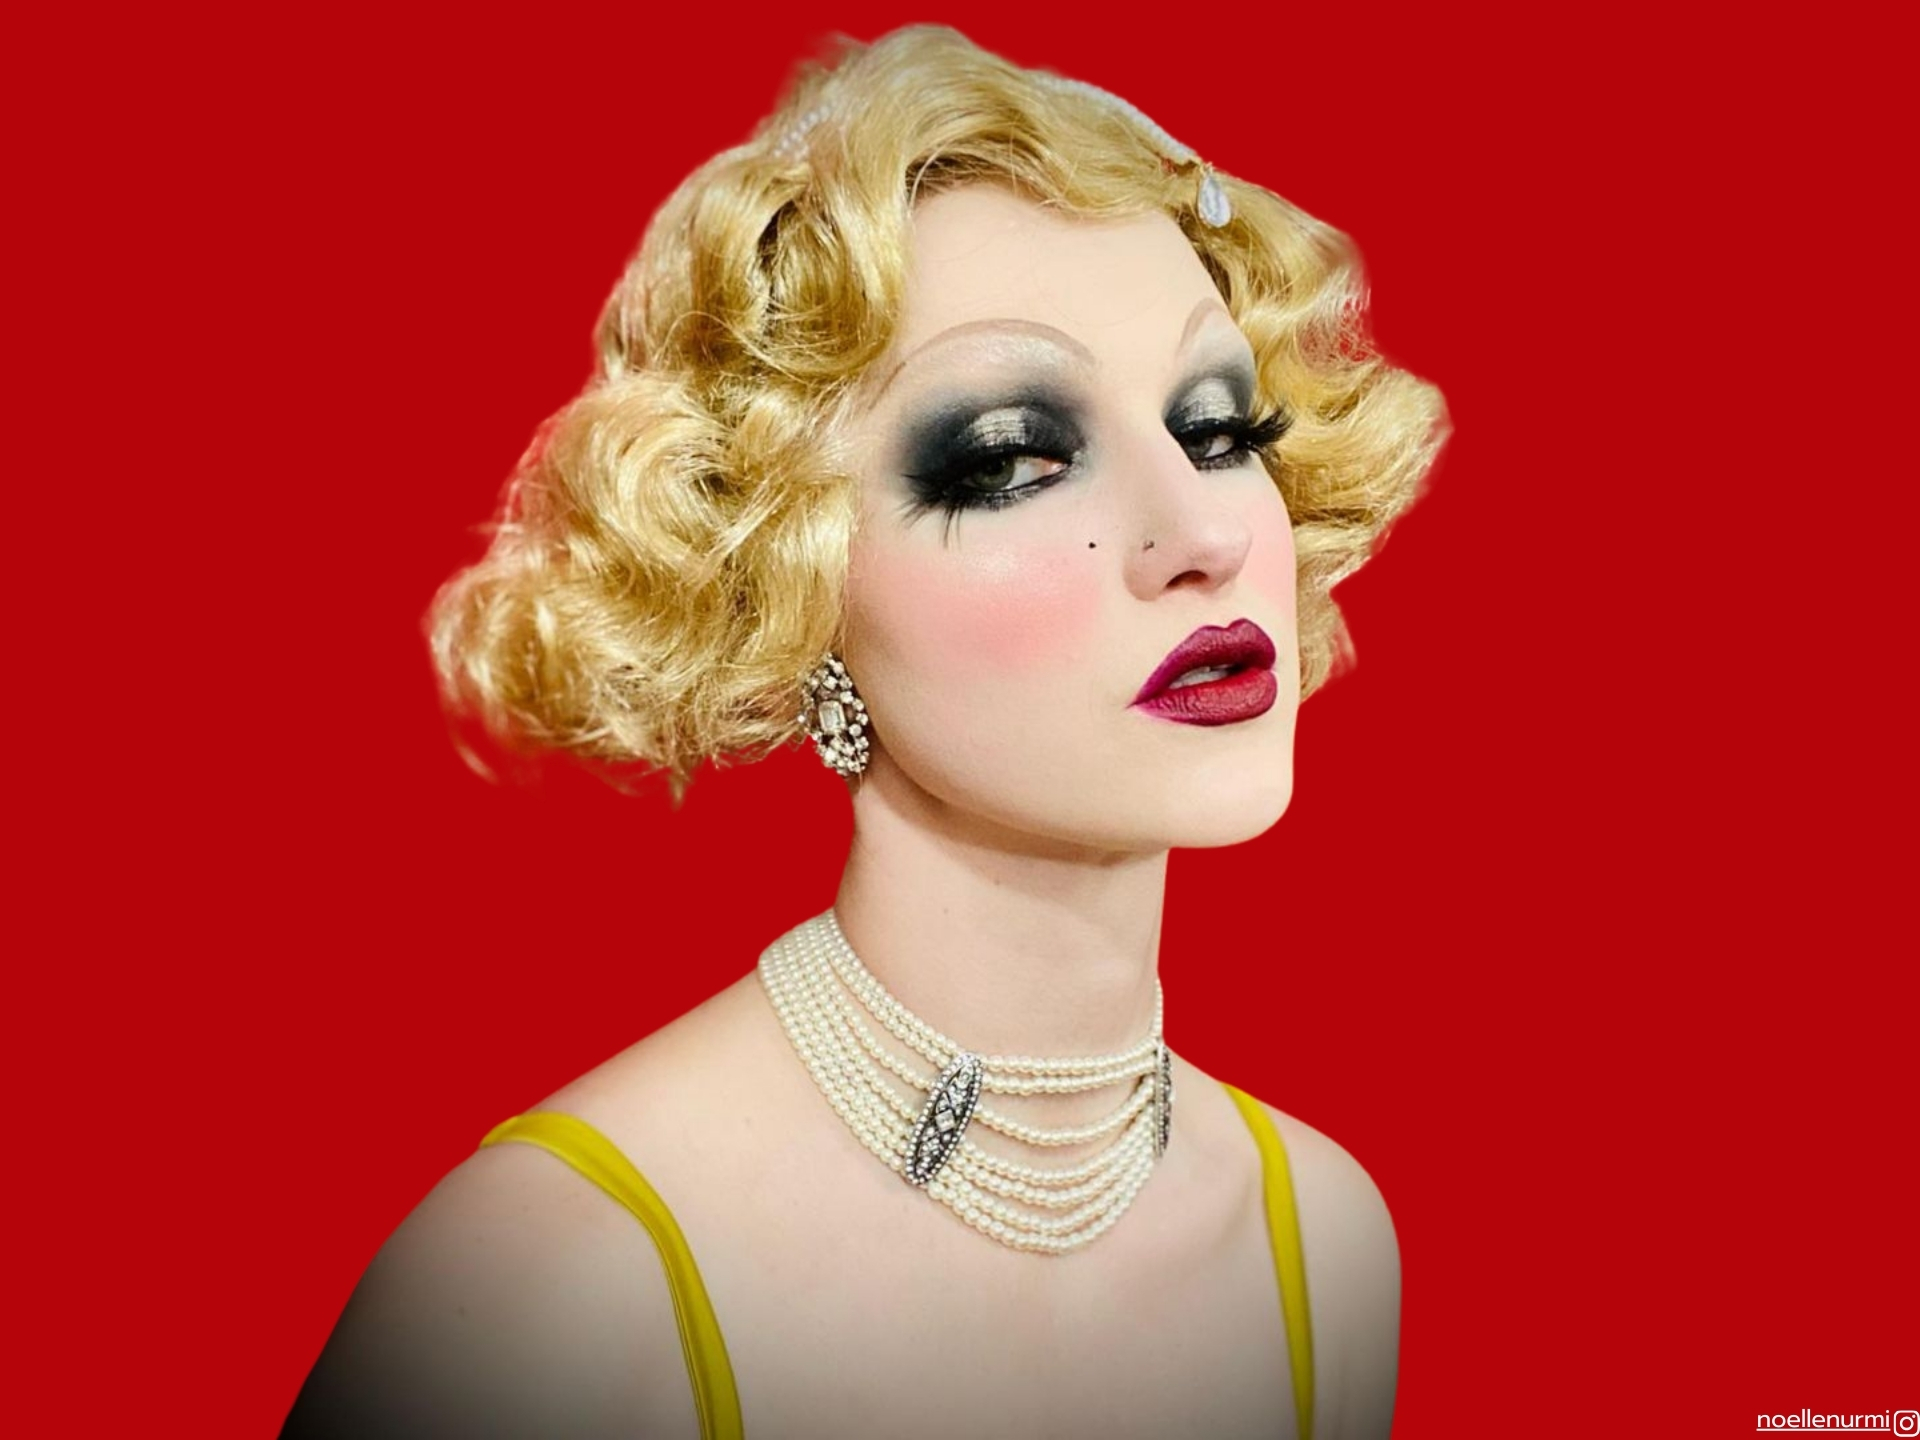 Iconic 1920s Hair Styles Are Making A Glamorous Comeback